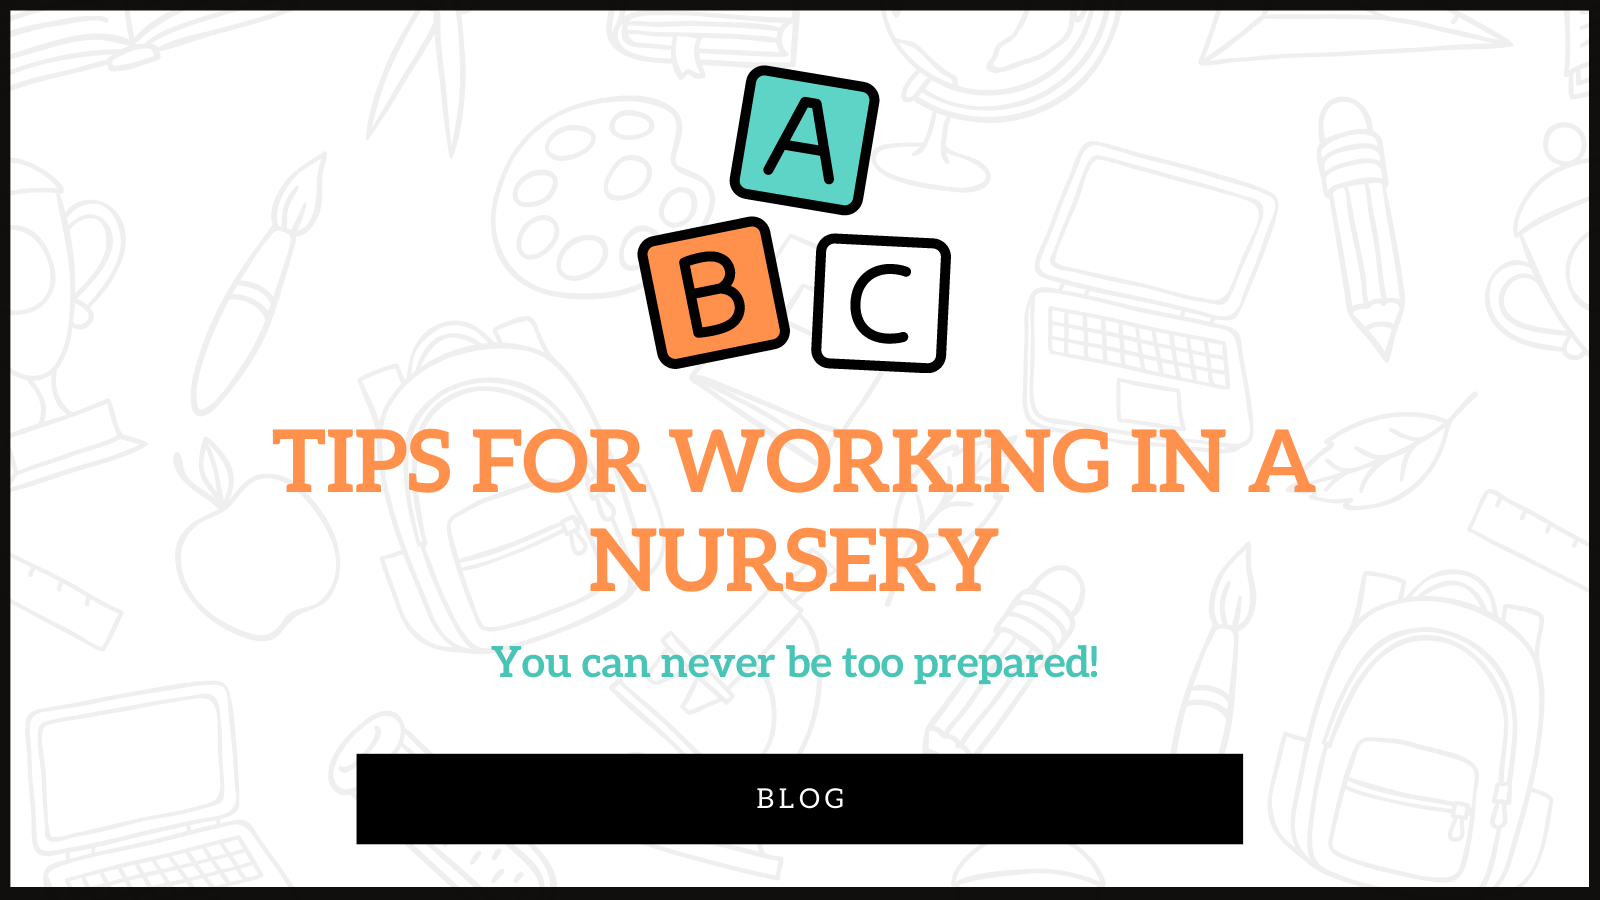 Tips for working in a London nursery